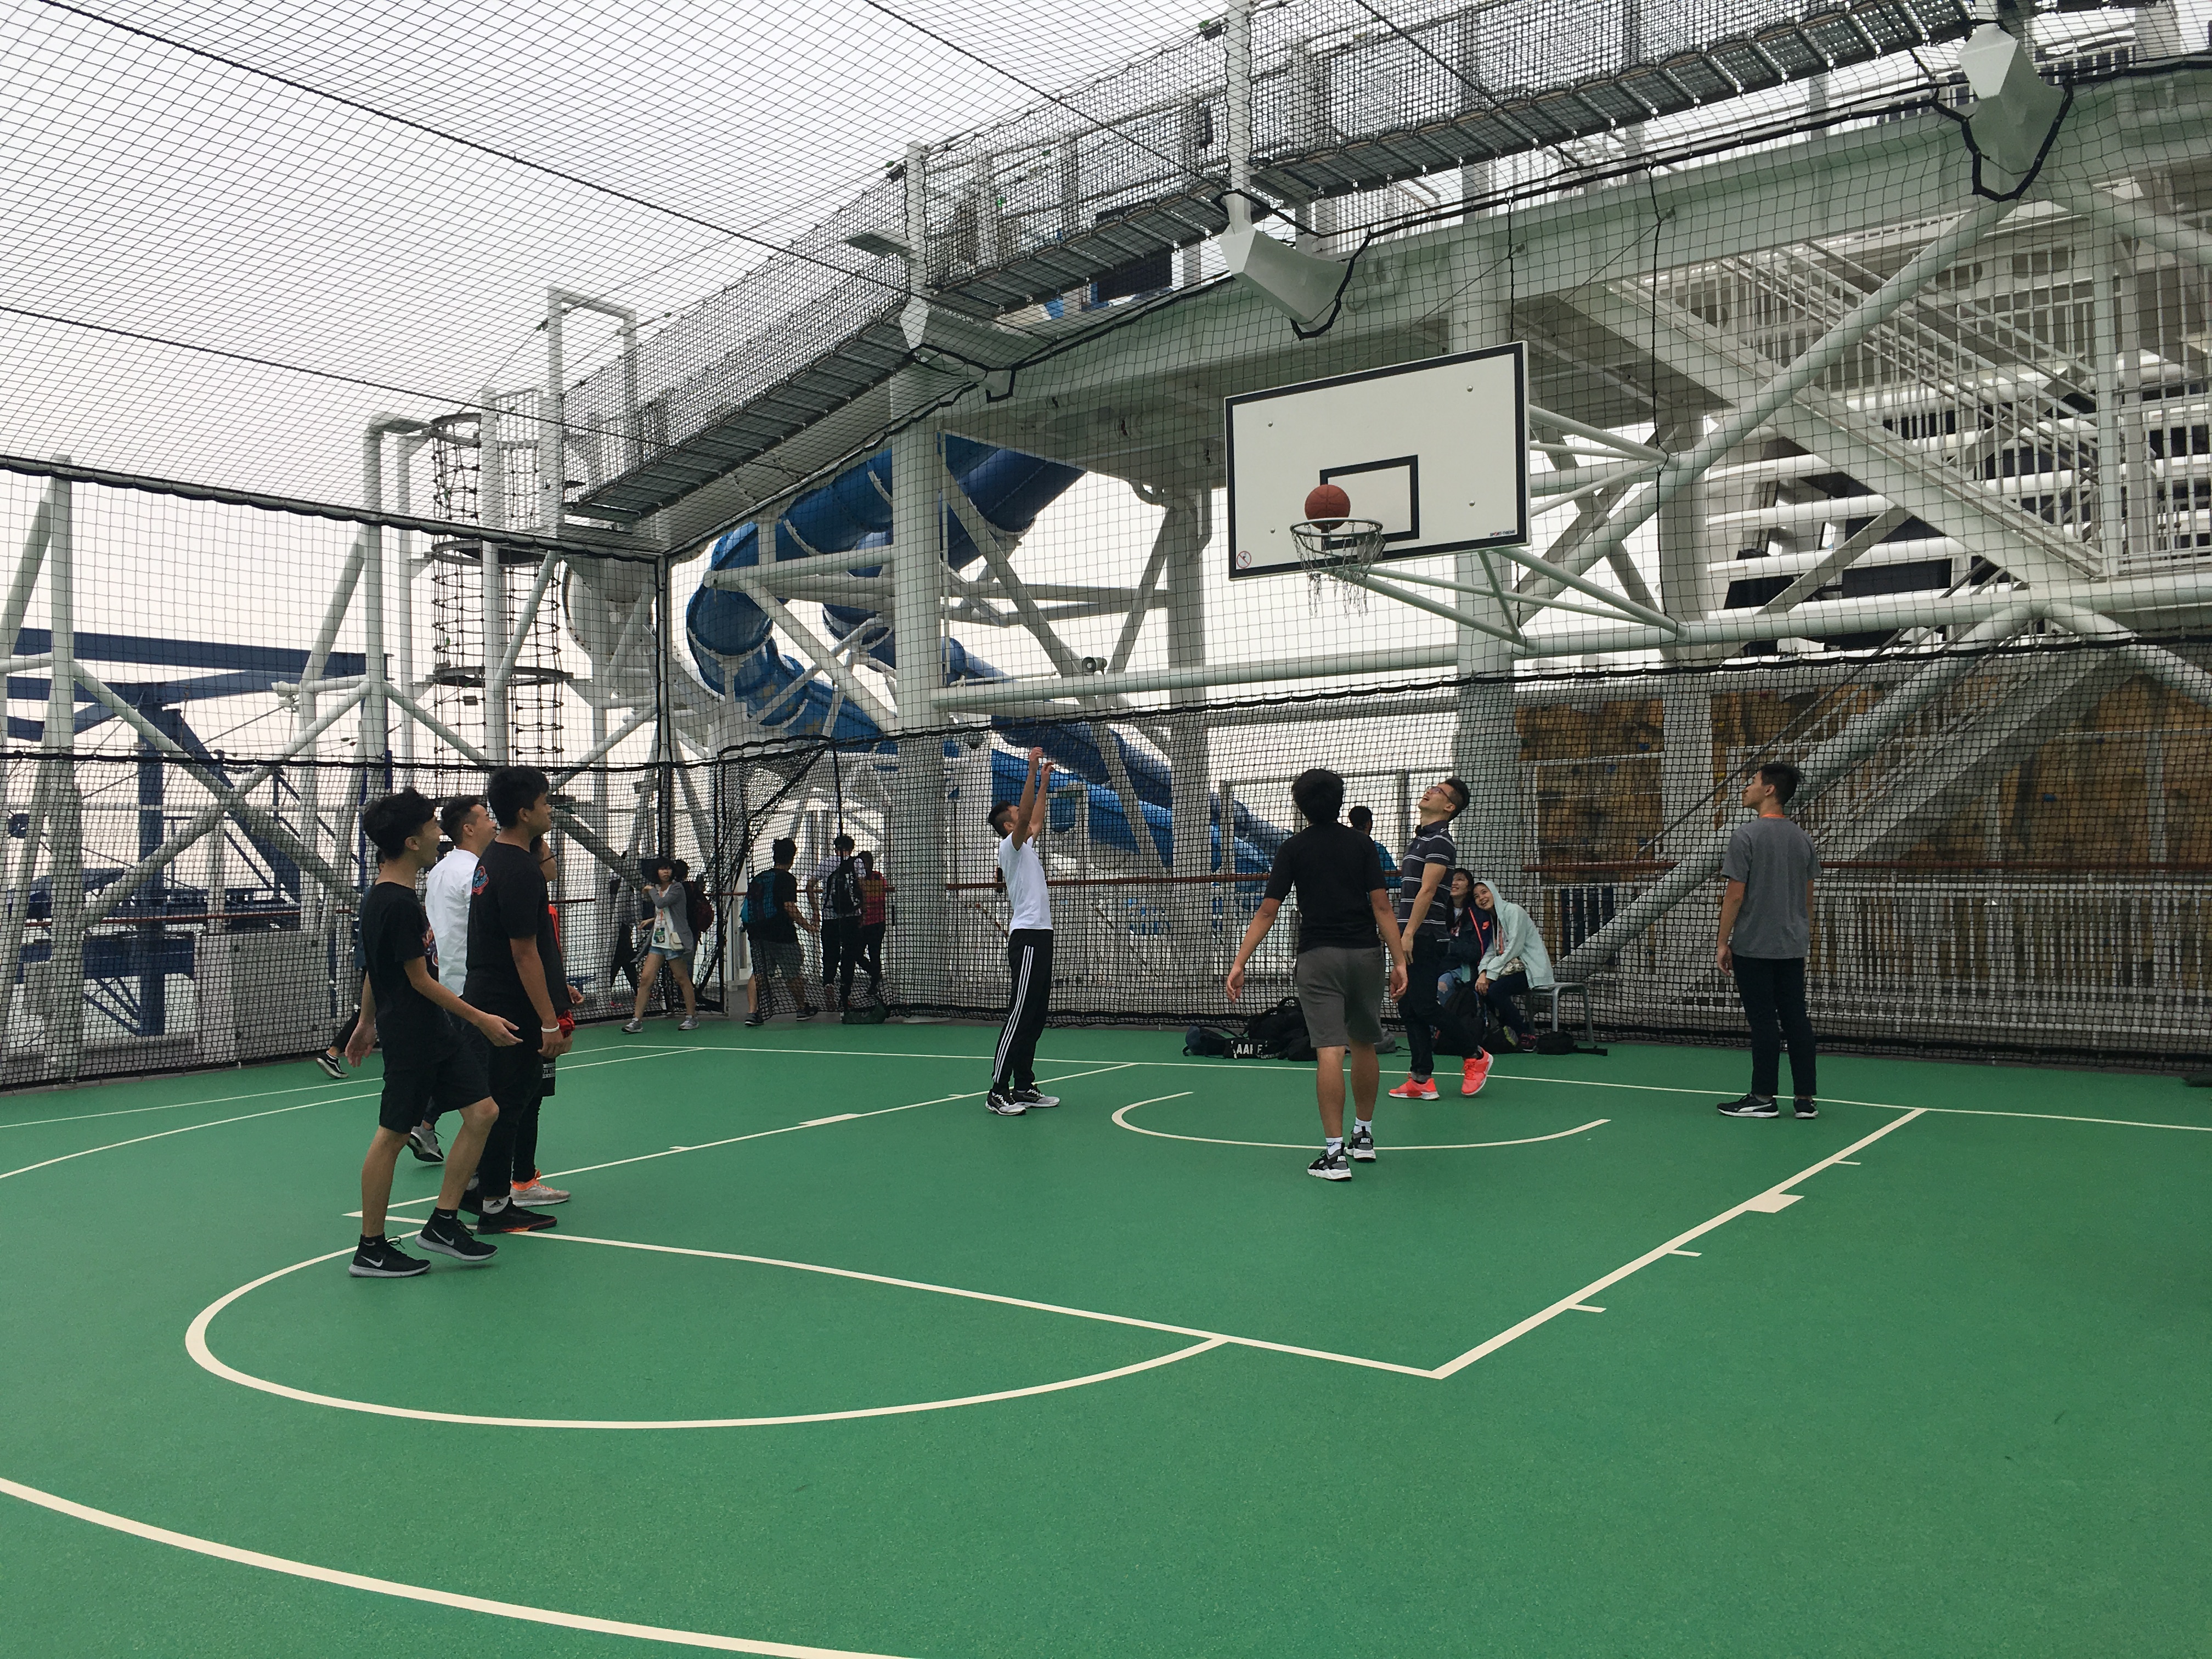 Participants showing their sports talents at the basketball court on the roof deck of the cruise. 